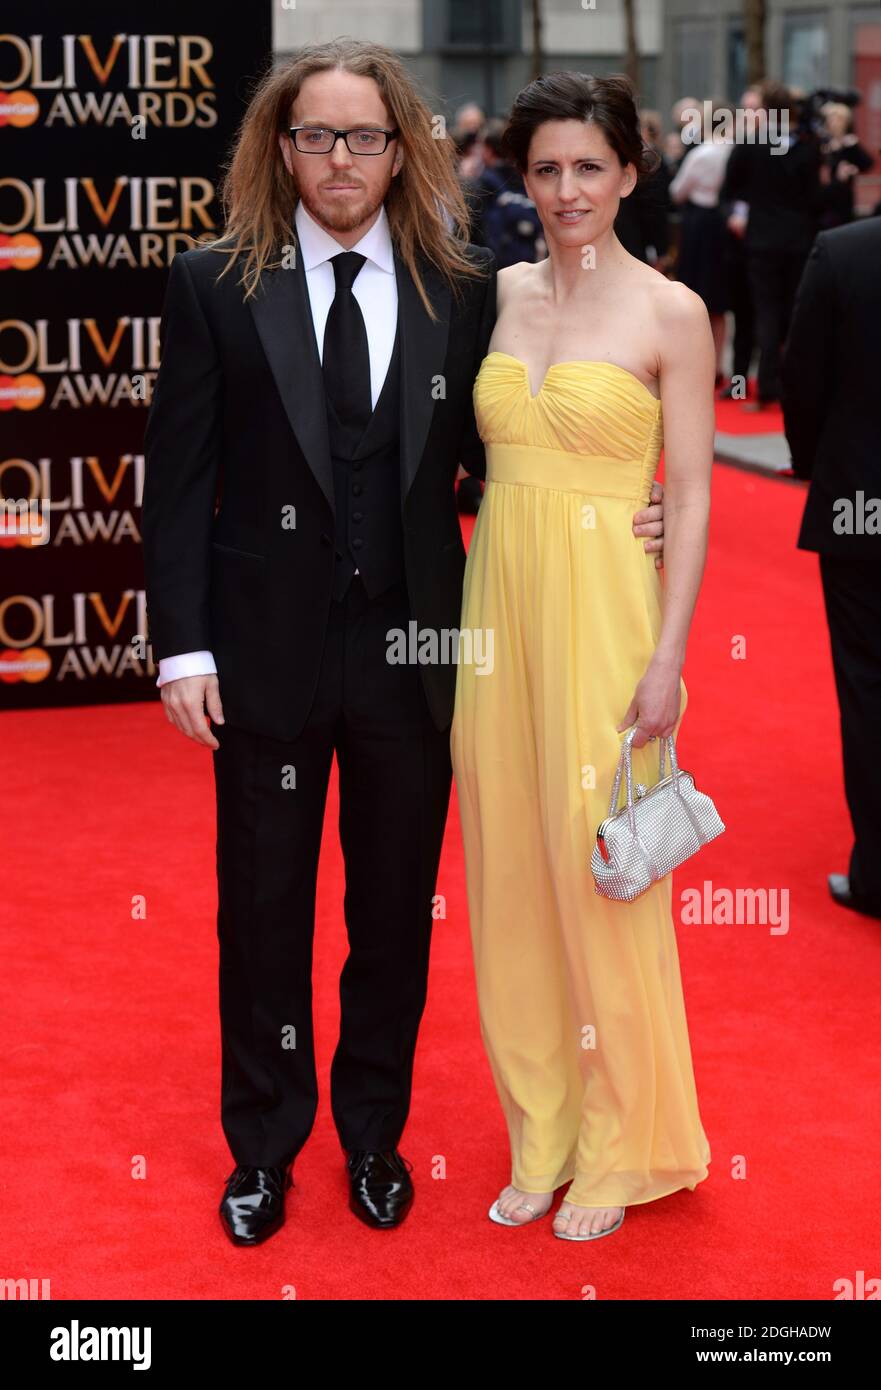 Tim Minchin and his wife Sarah arriving at the Olivier Awards 2013, Royal  Opera House, Covent Garden, London Stock Photo - Alamy